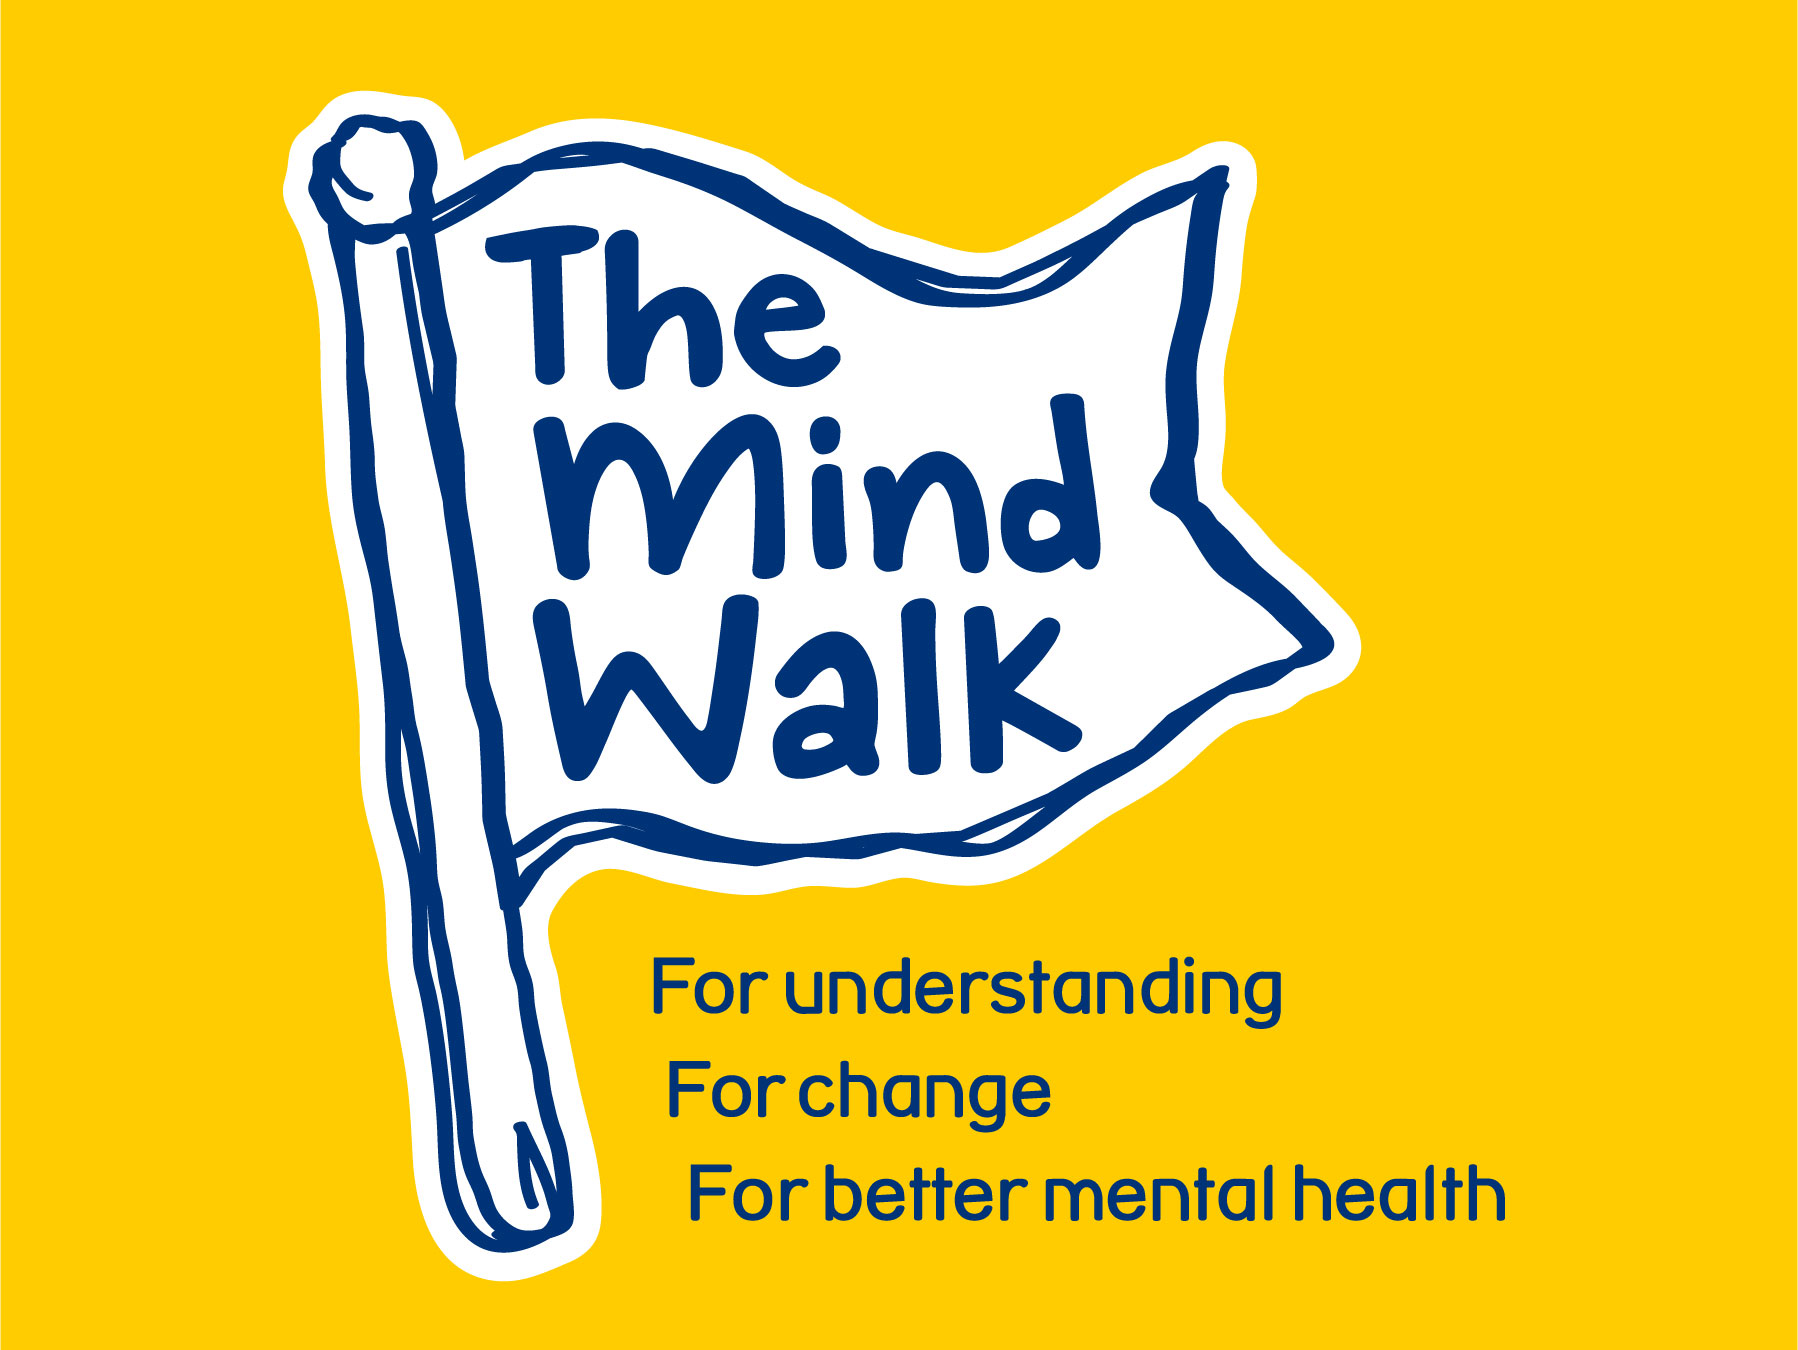 The Mind Walk for better mental health